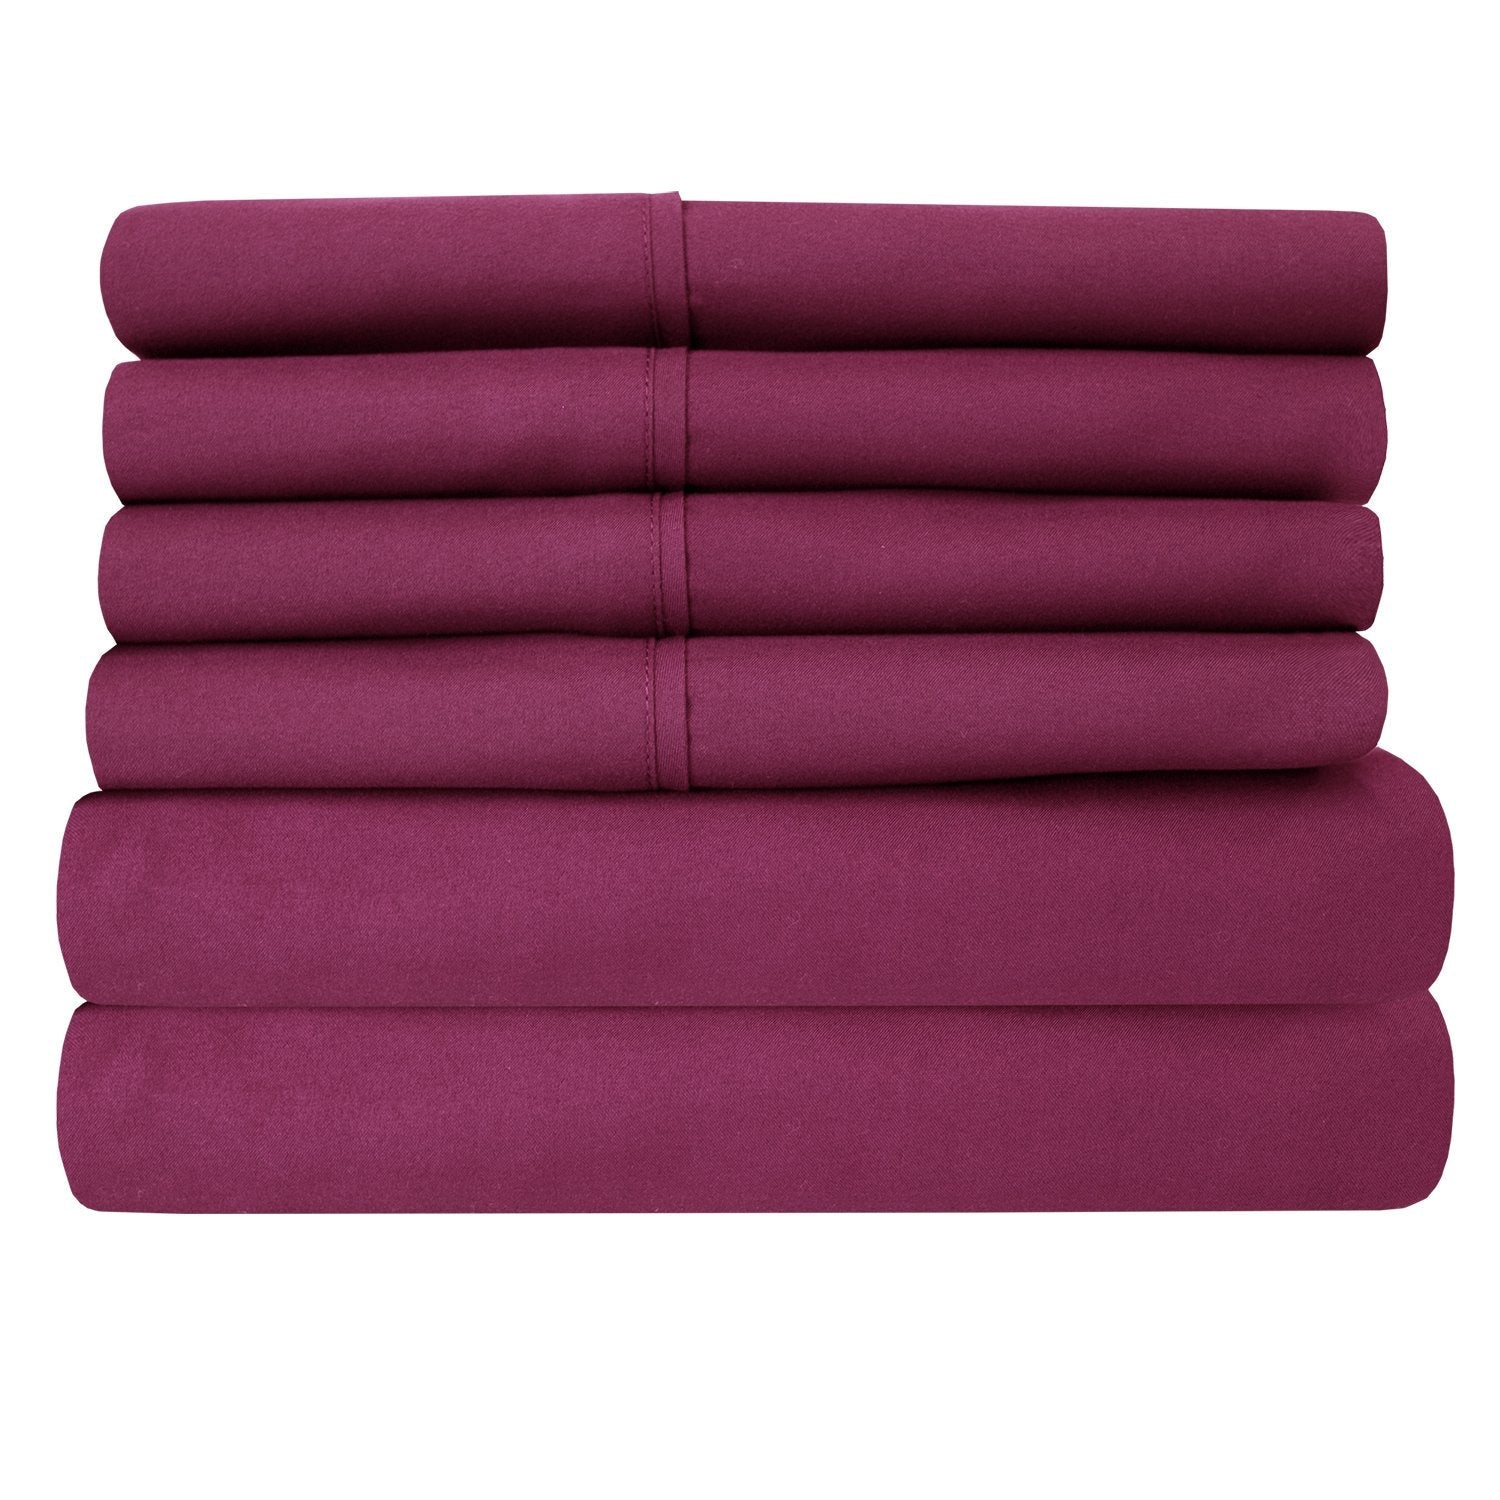 Deluxe 6-Piece Bed Sheet Set (Berry) - Folded 2